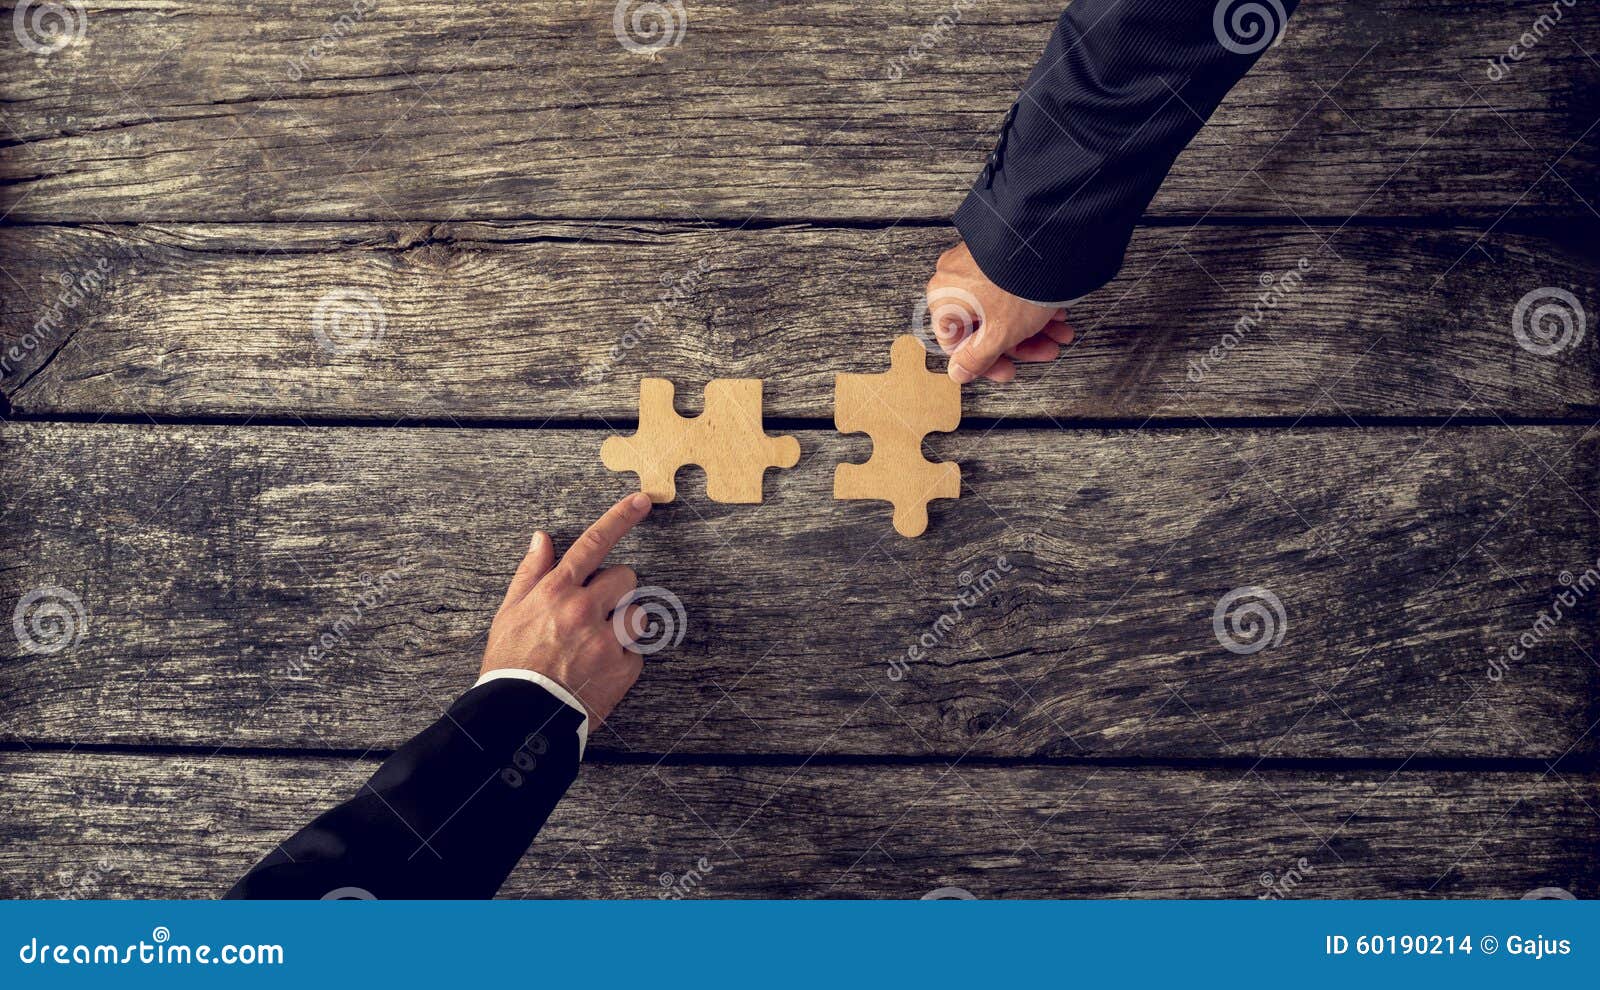 retro style image of two business partners each placing one matc